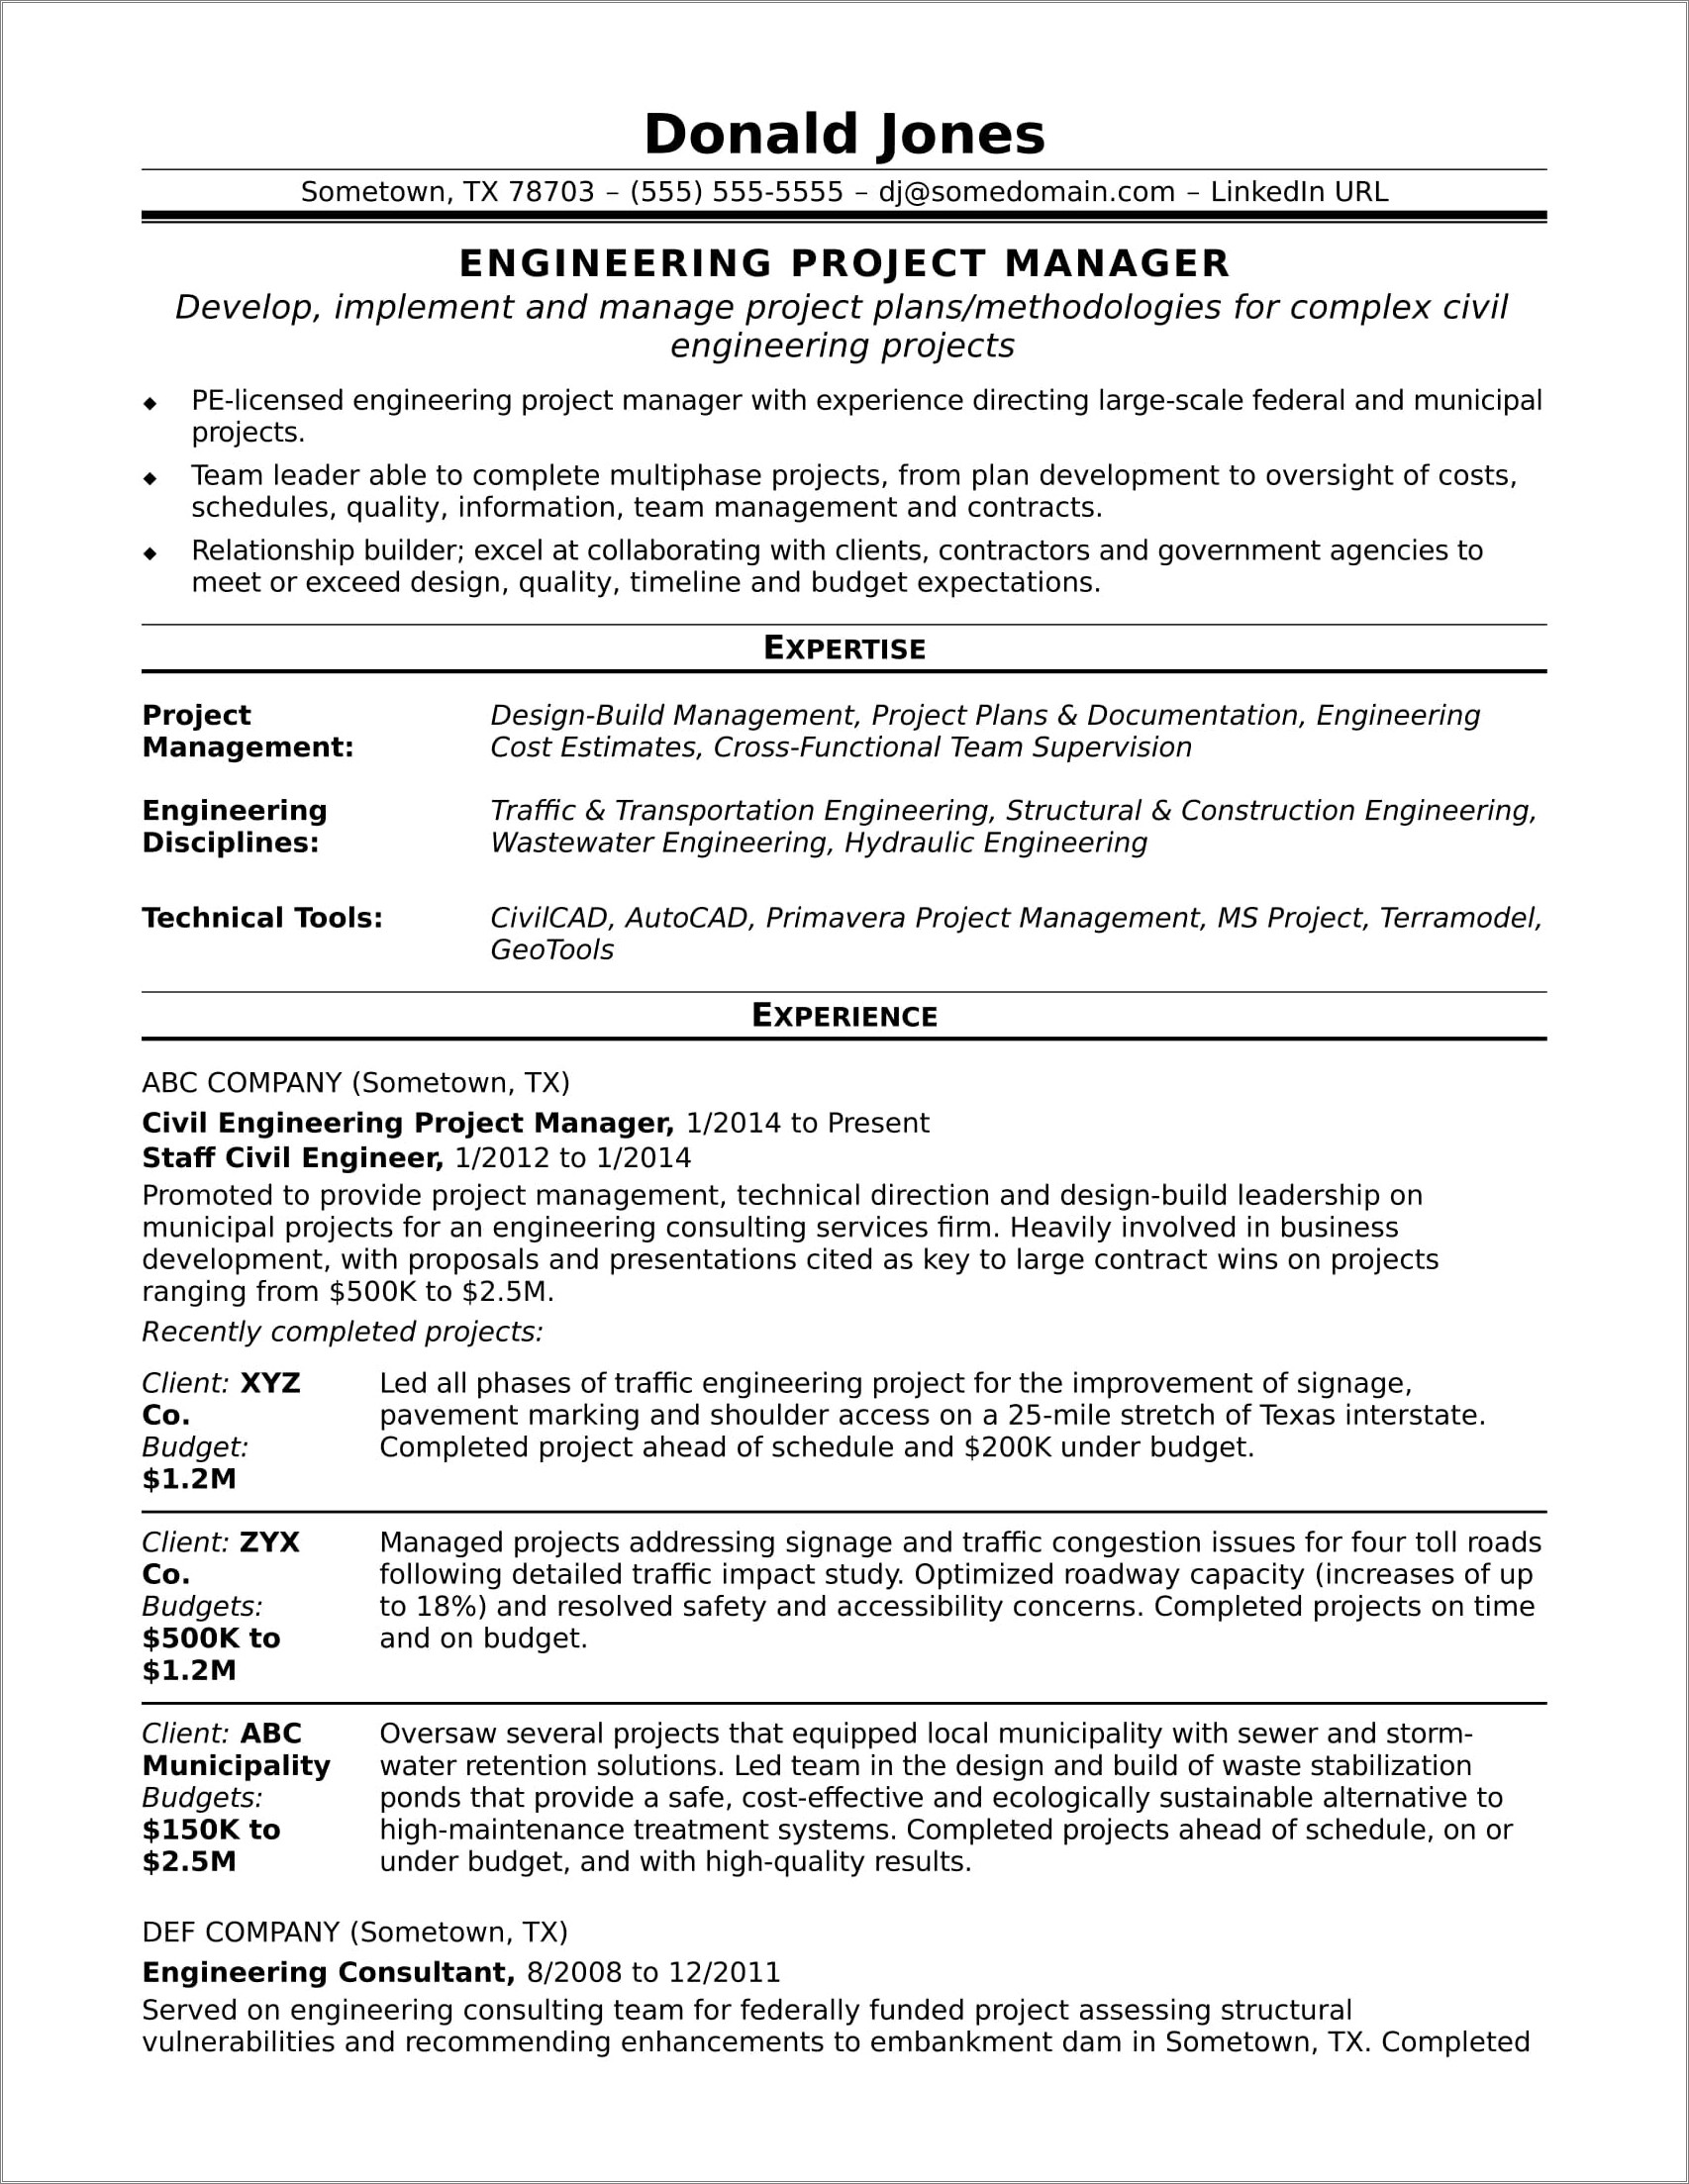 Sample Functional Resume For Project Manager